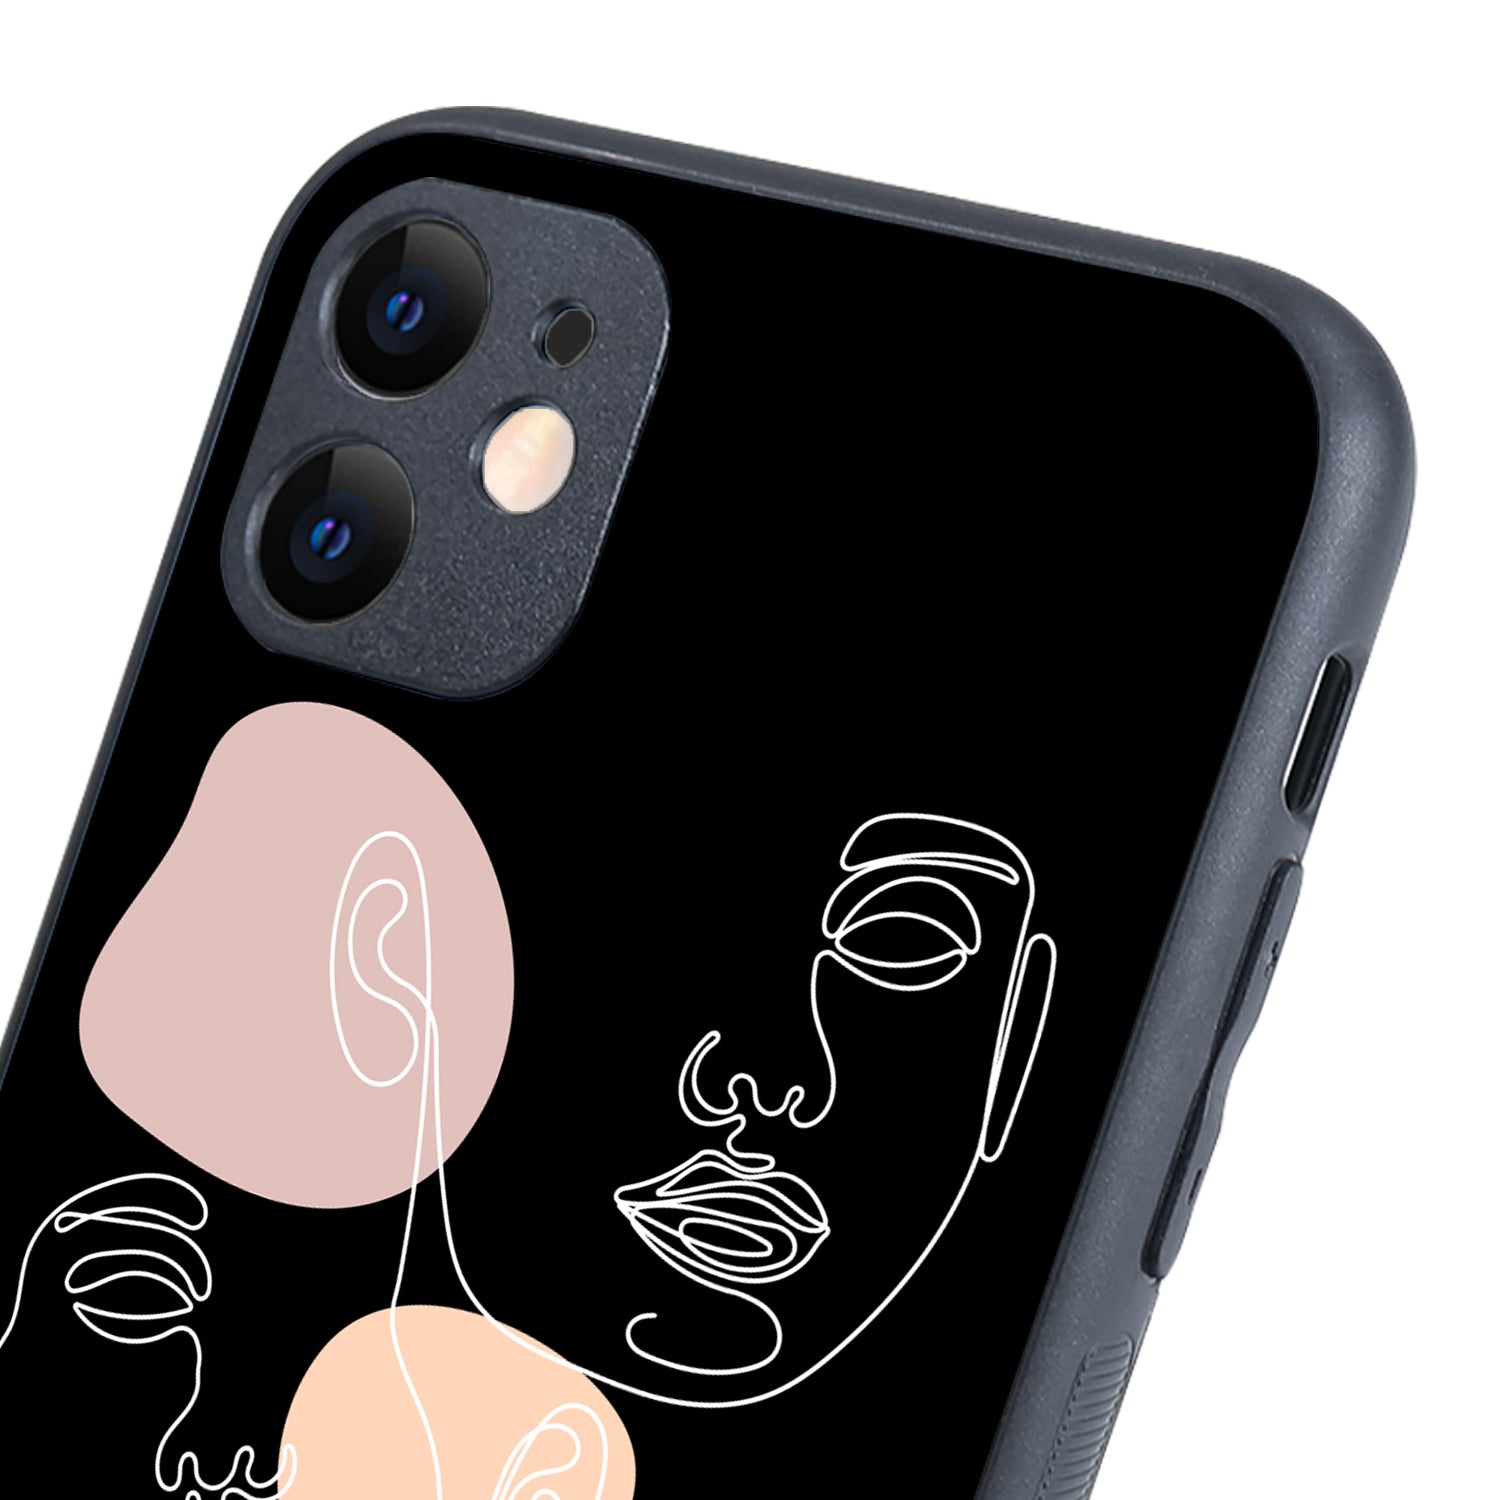 Face Aesthetic Human iPhone 11 Case